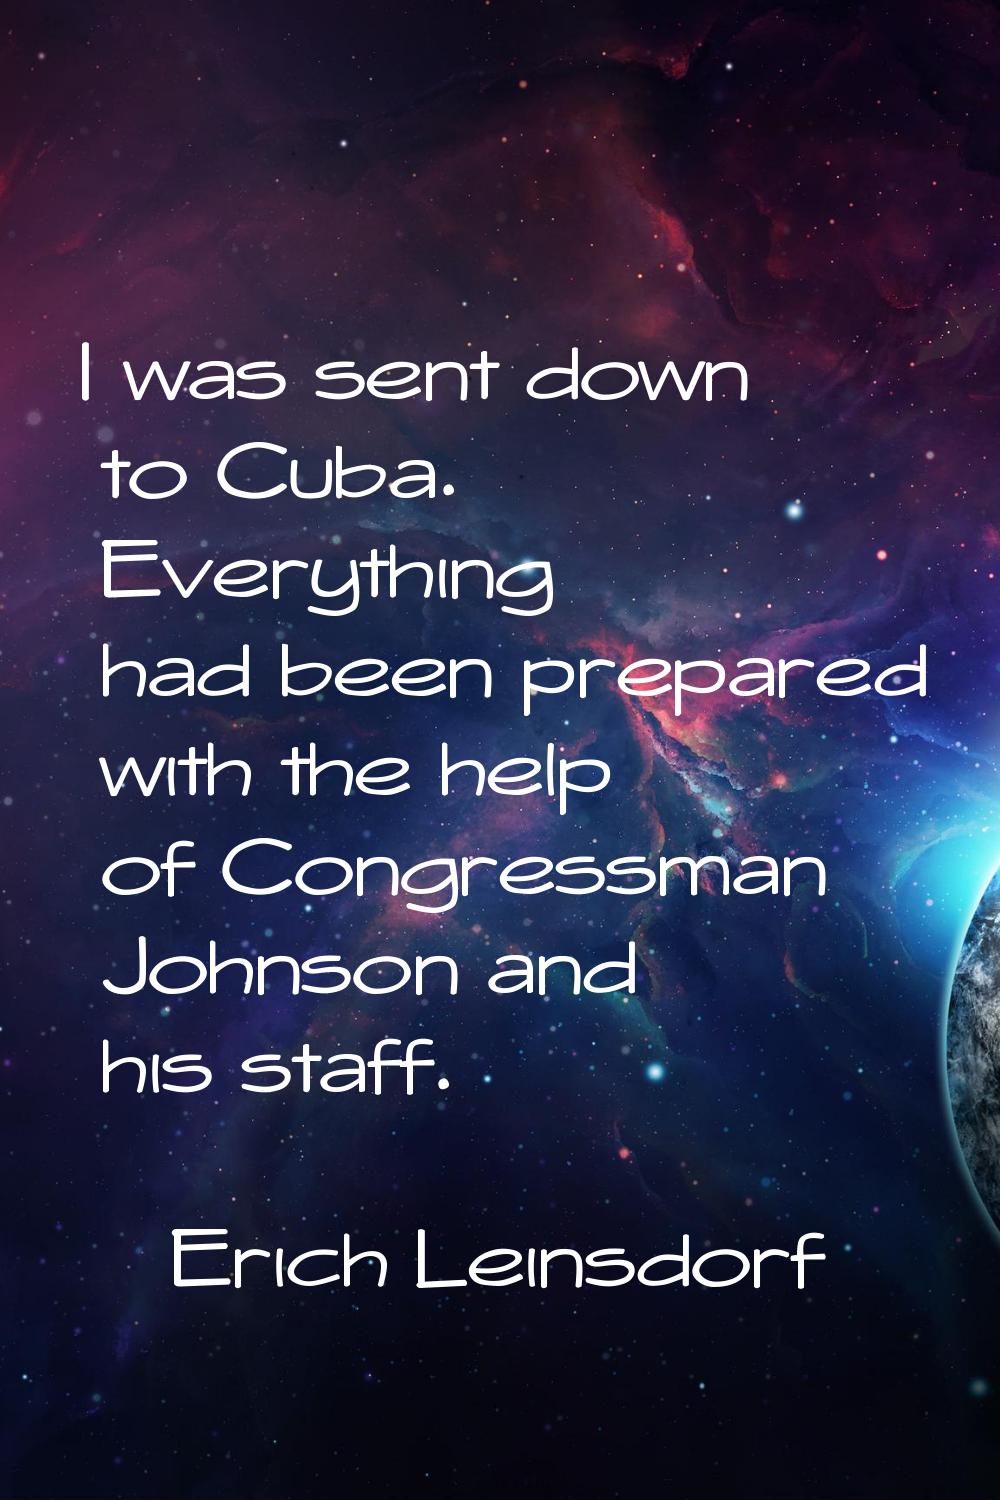 I was sent down to Cuba. Everything had been prepared with the help of Congressman Johnson and his 